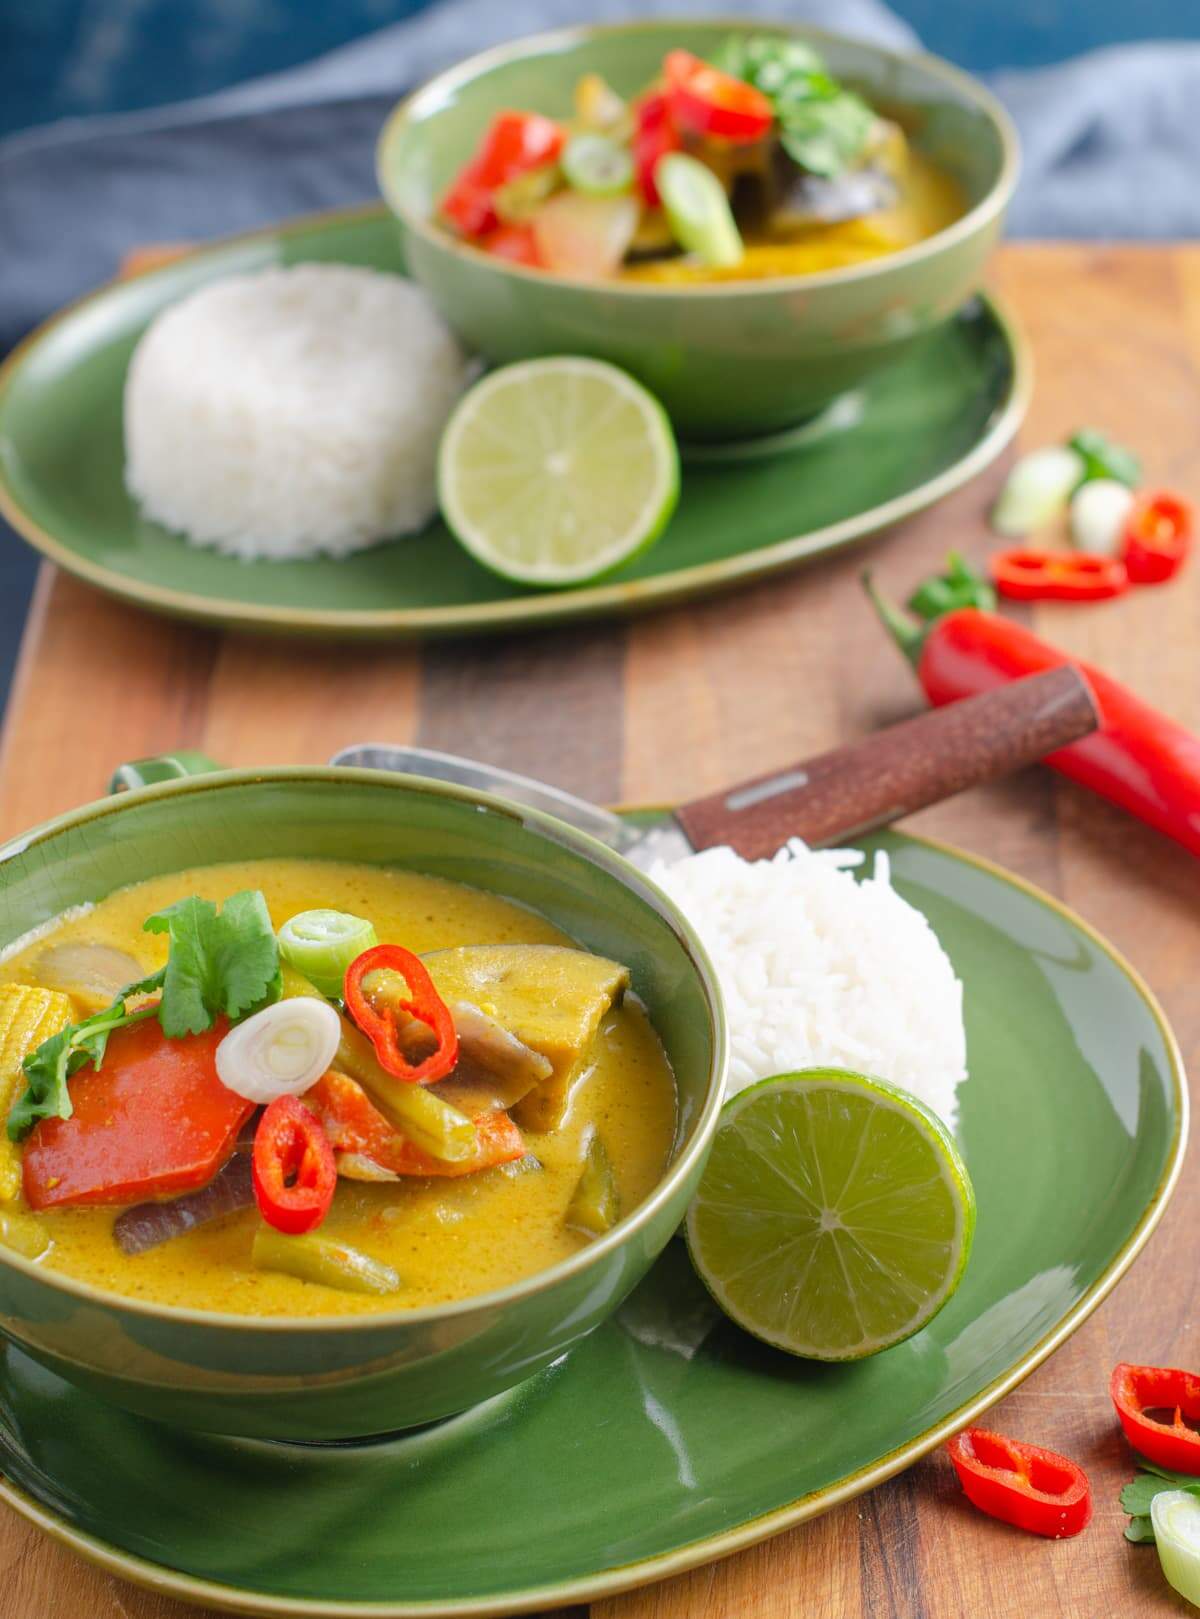 Two green bowls on matching plates filled with vegetable and coconut curry served with rice, limes and scattered green onions and fresh chillies.